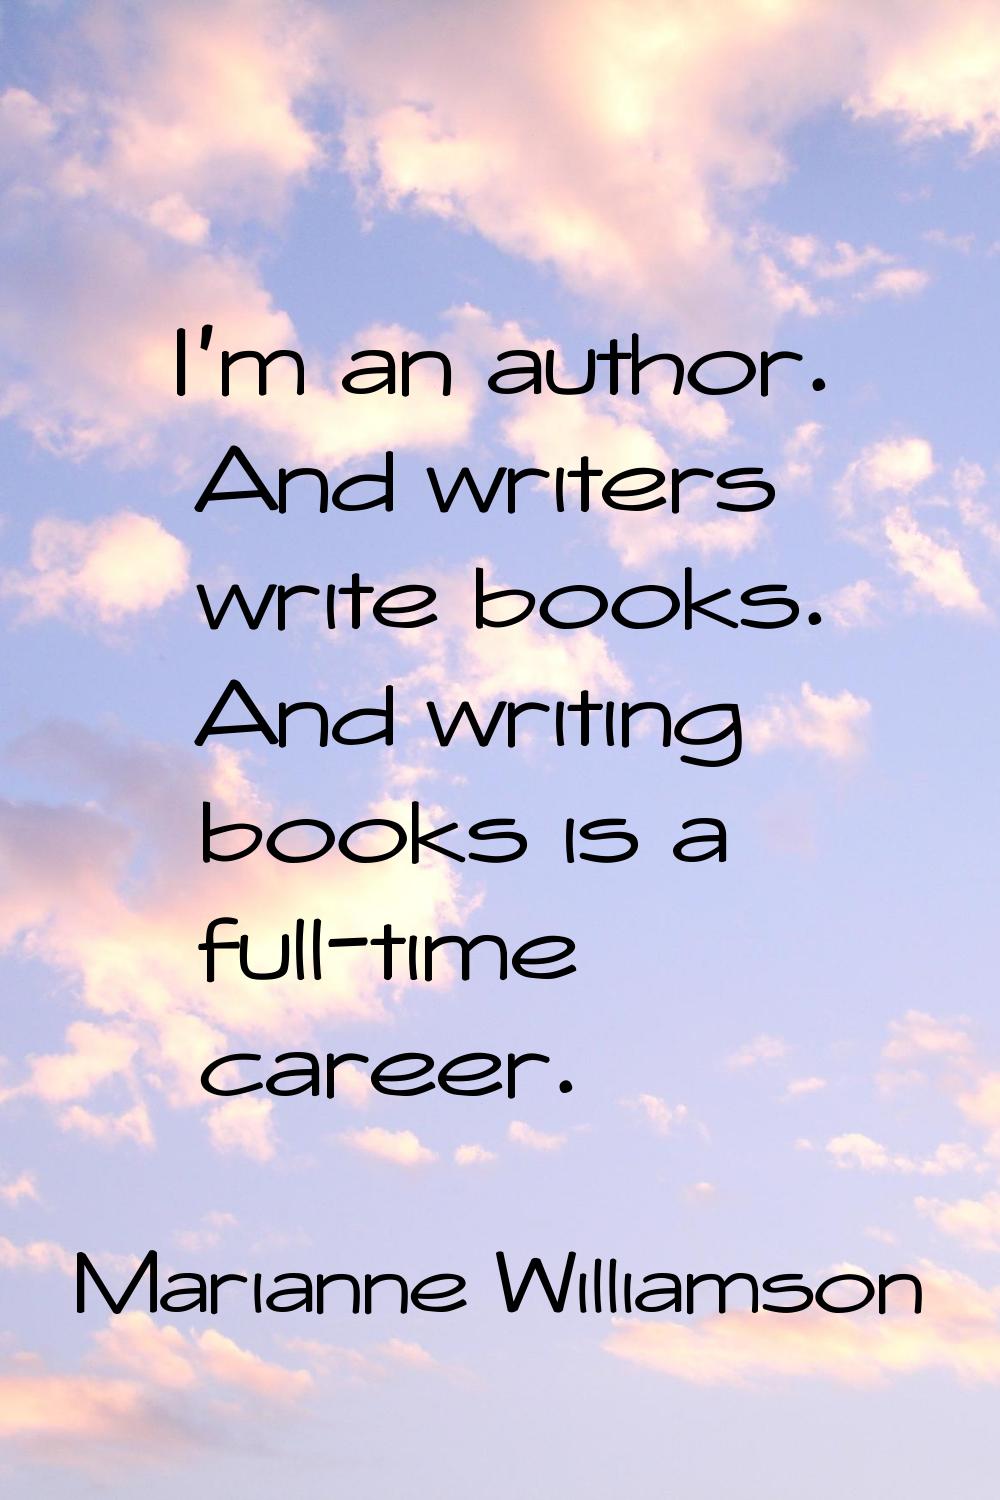 I'm an author. And writers write books. And writing books is a full-time career.